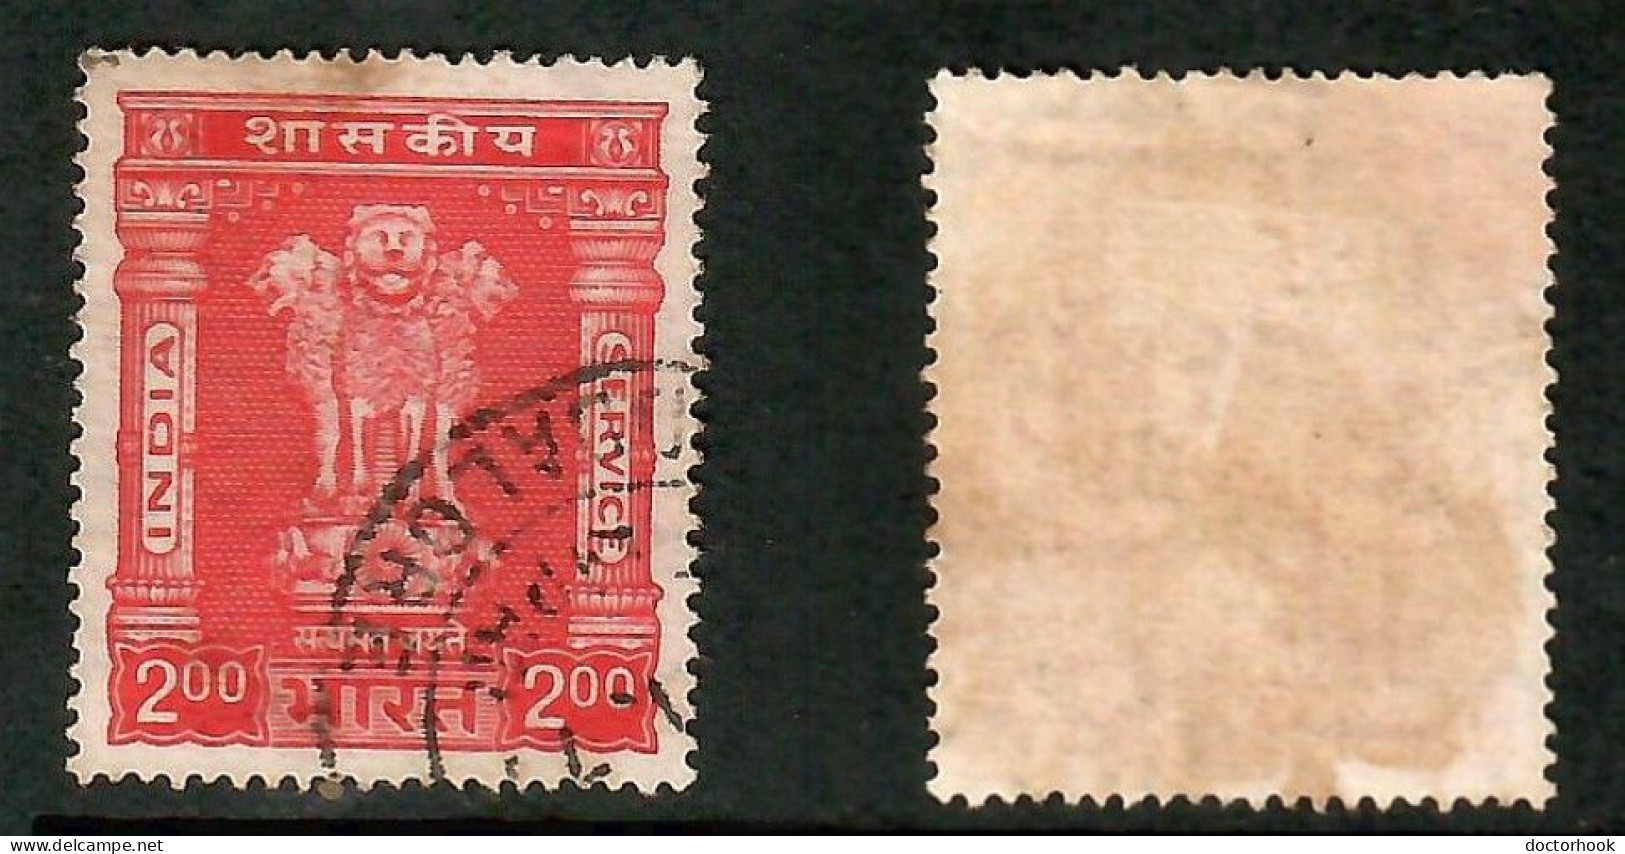 INDIA   Scott # O 183 USED (CONDITION AS PER SCAN) (Stamp Scan # 991-6) - Dienstmarken